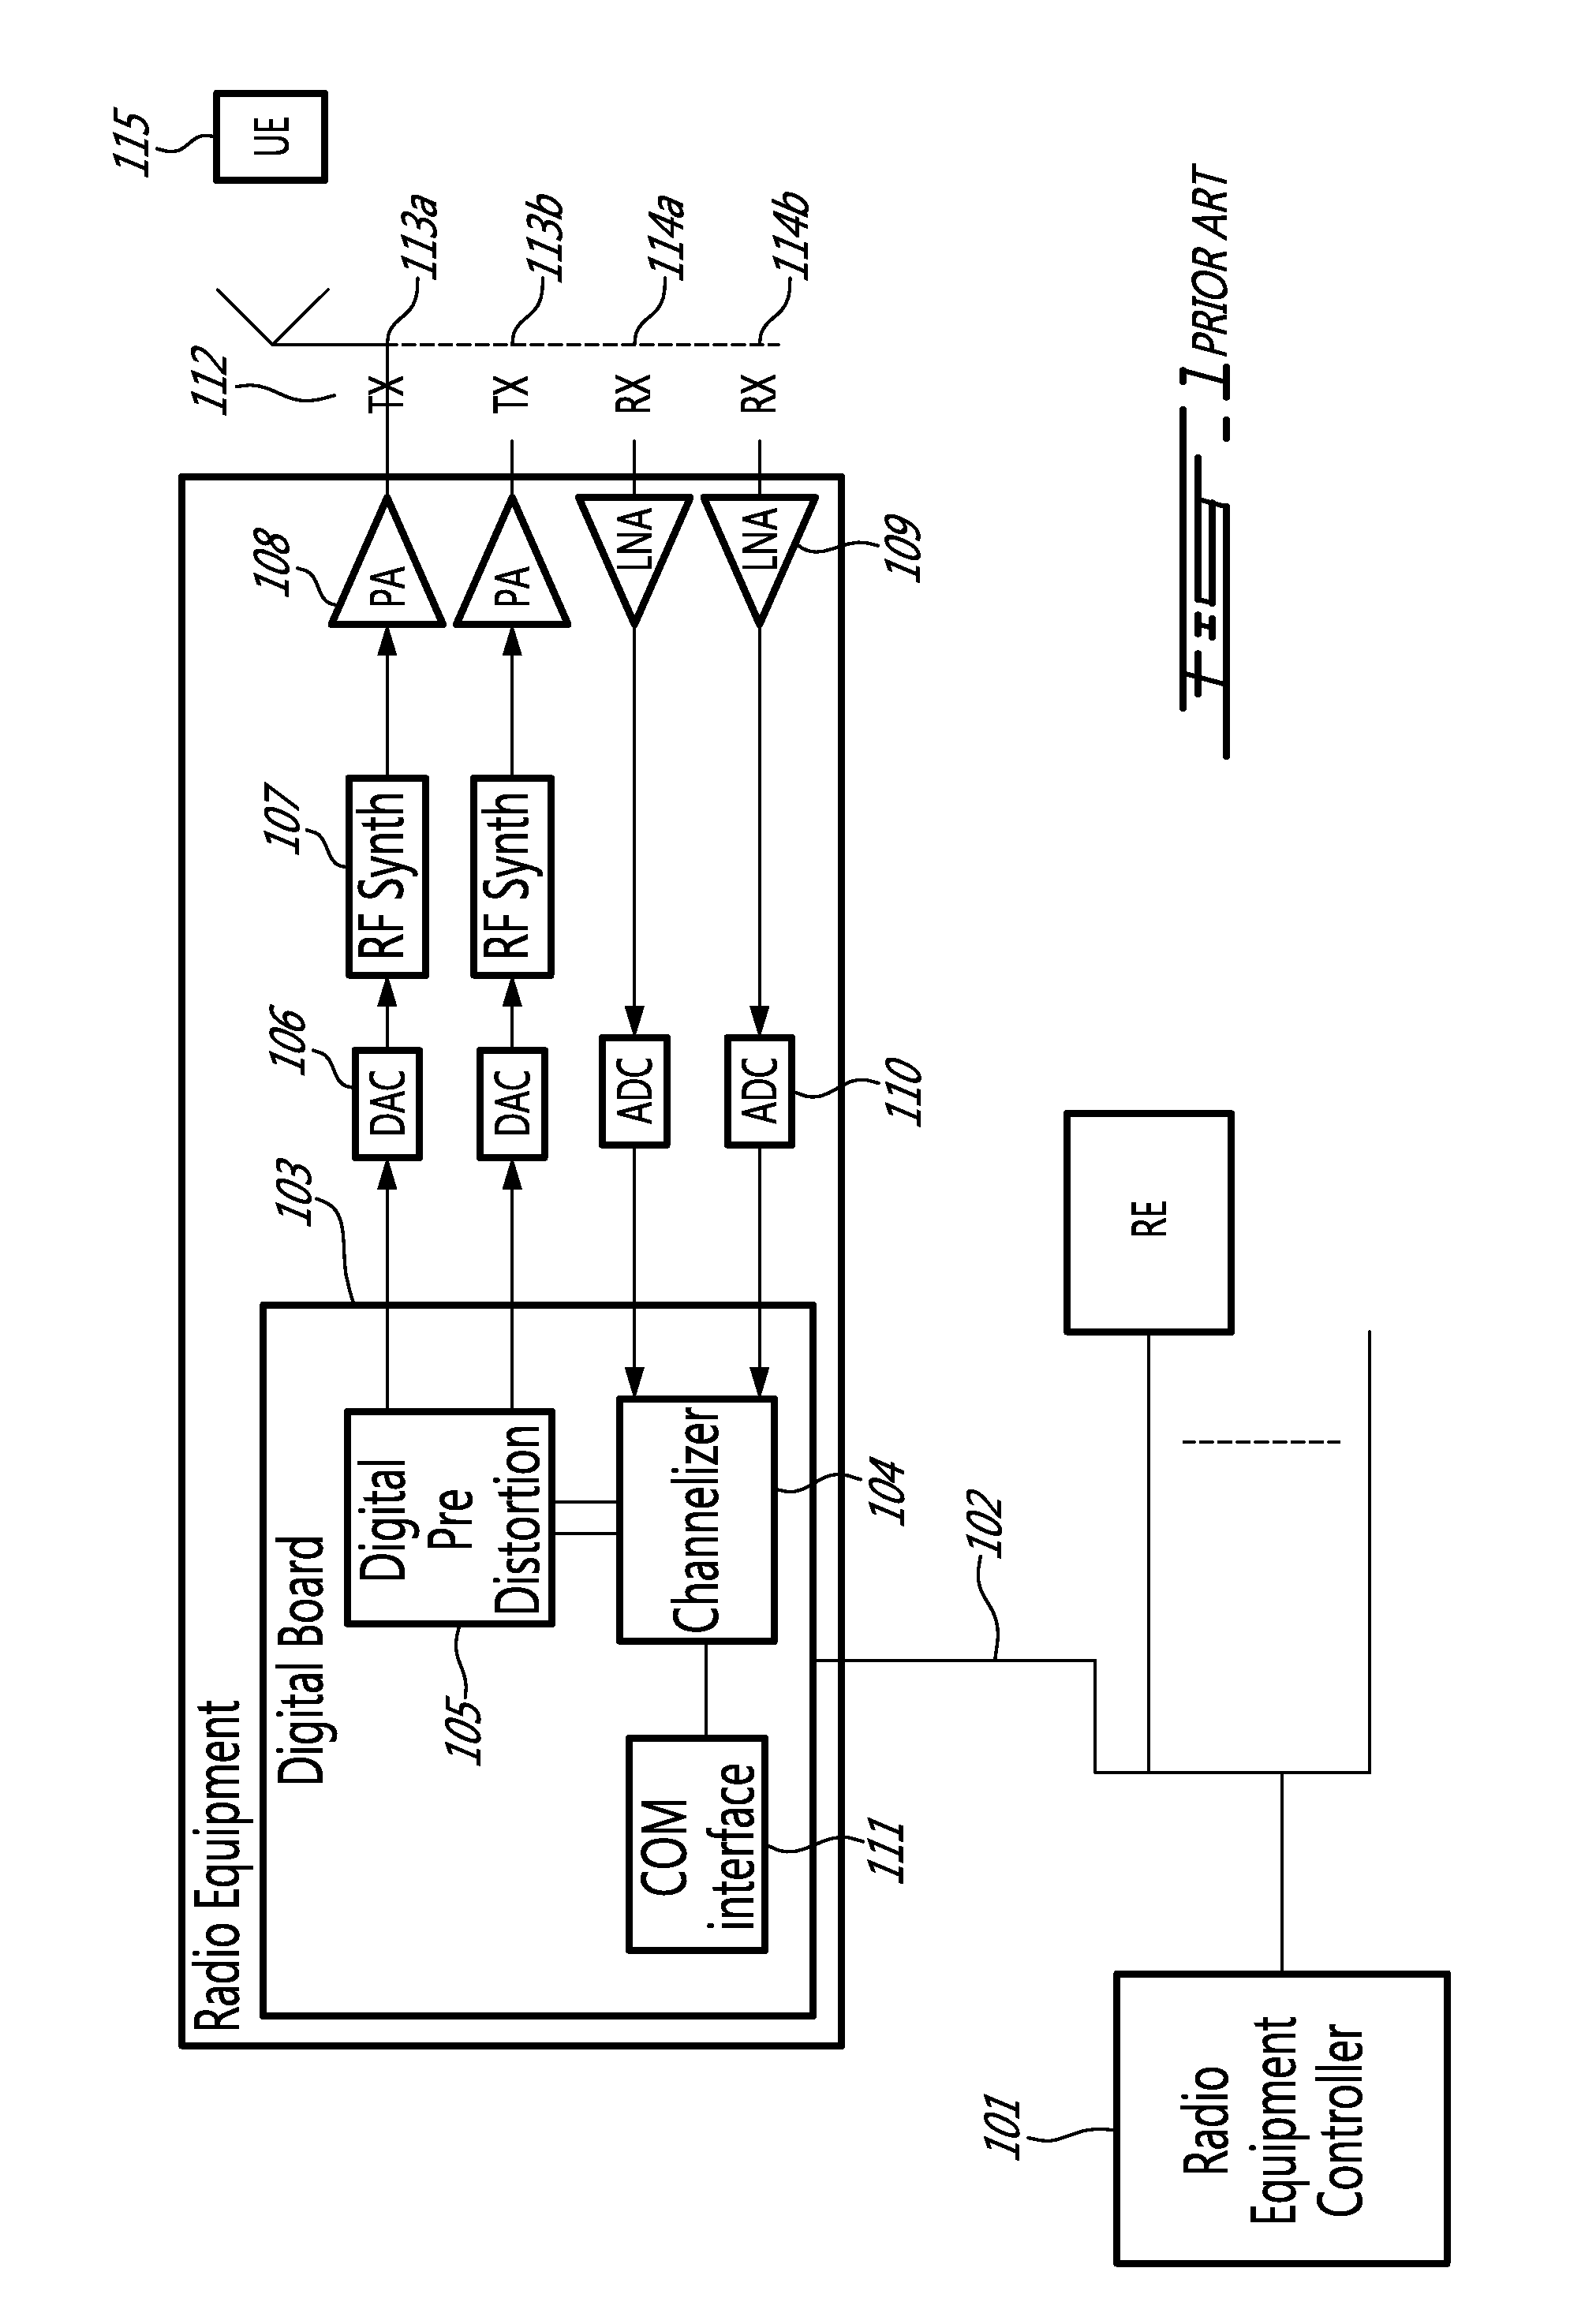 Method and system for providing wireless base station radio with non-disruptive service power class switching